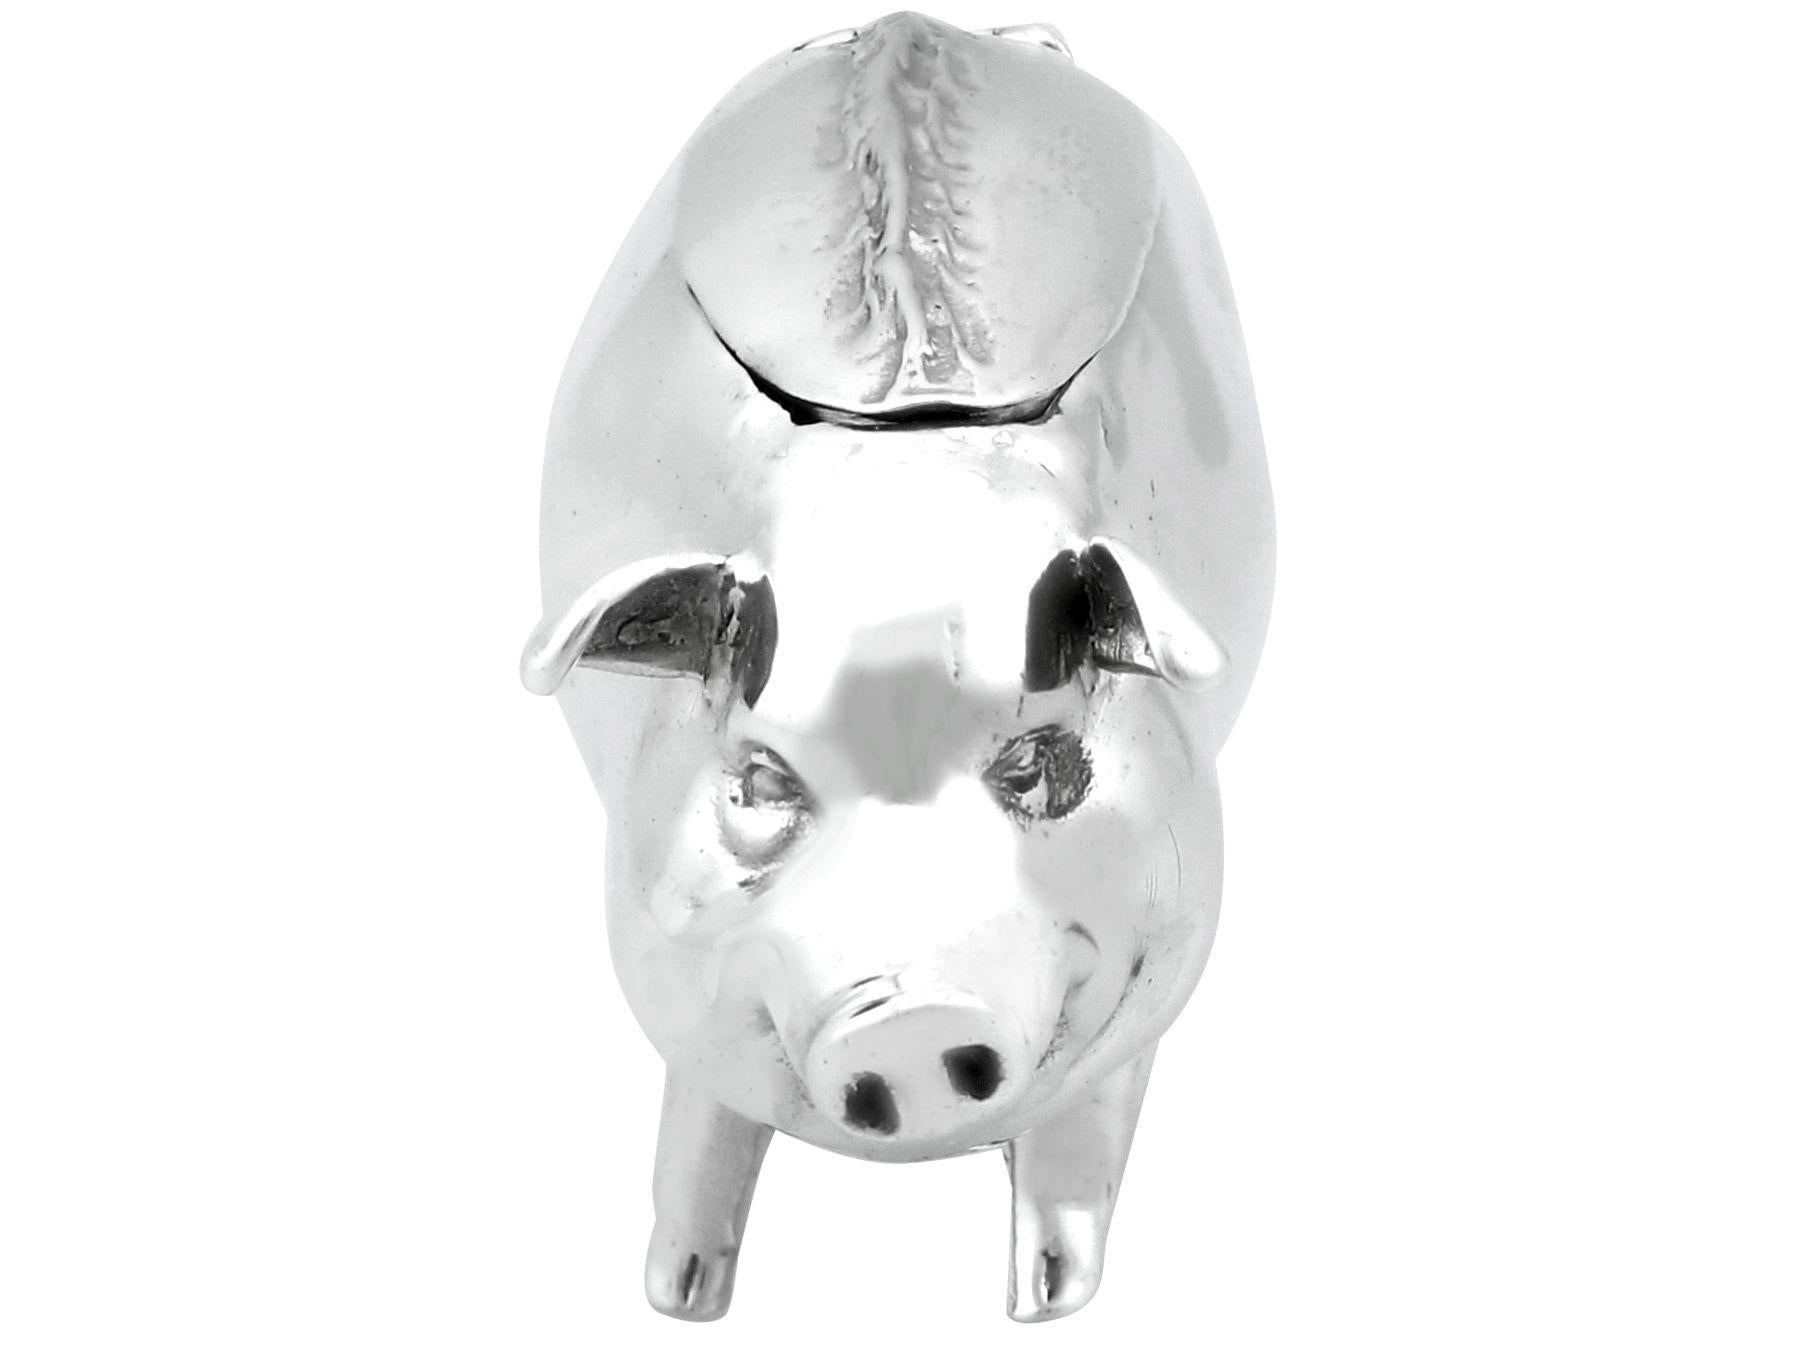 An exceptional, fine and impressive antique Edwardian English sterling silver vesta box modelled in the form of a pig; an addition to our ornamental silverware collection

This exceptional antique Edwardian sterling silver vesta box has been